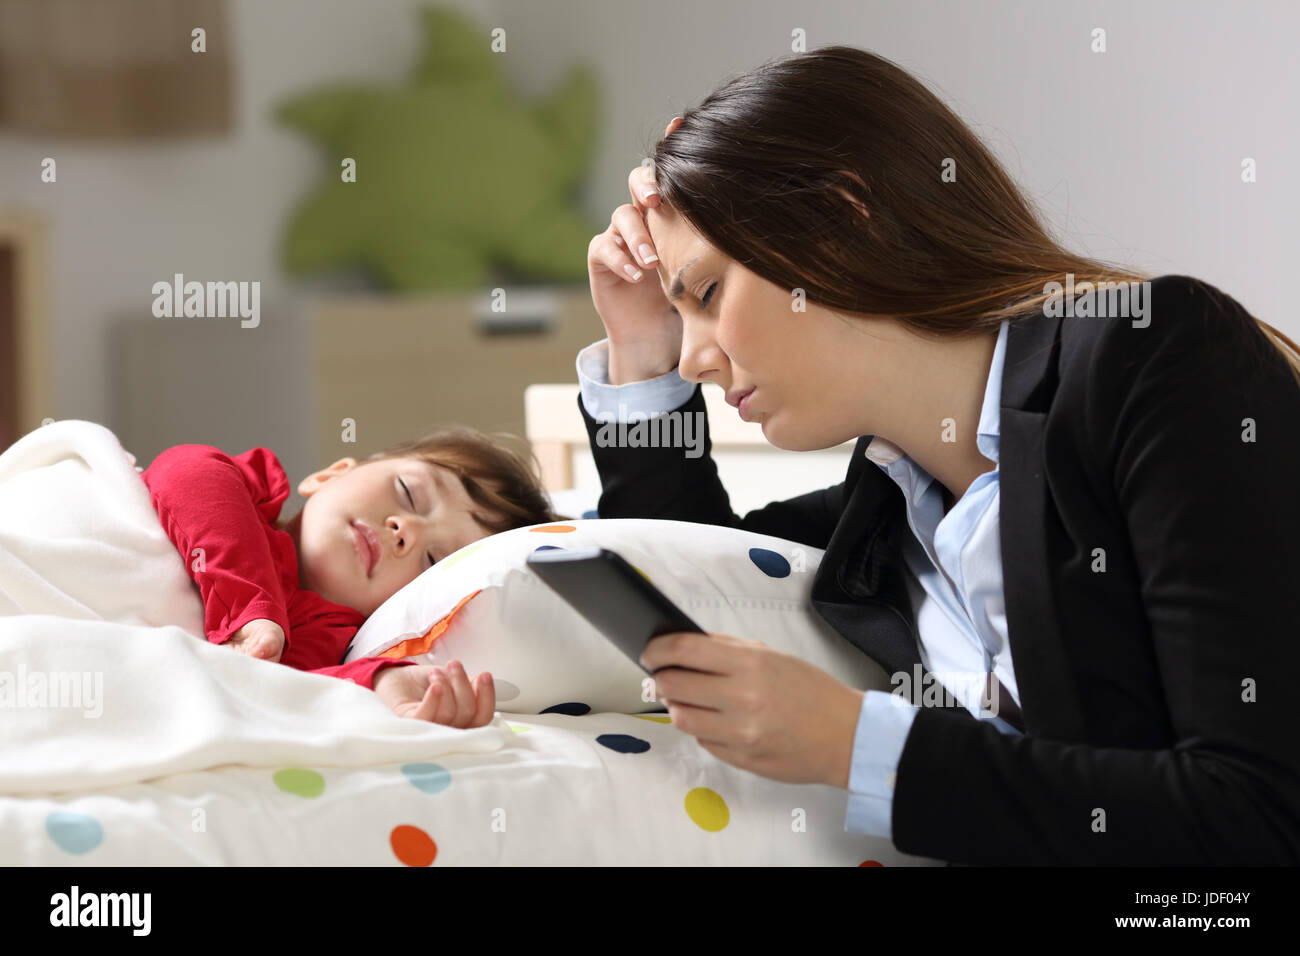 Tired worker mother wearing suit after work while her daughter is sleeping on a bed in a house interior Stock Photo